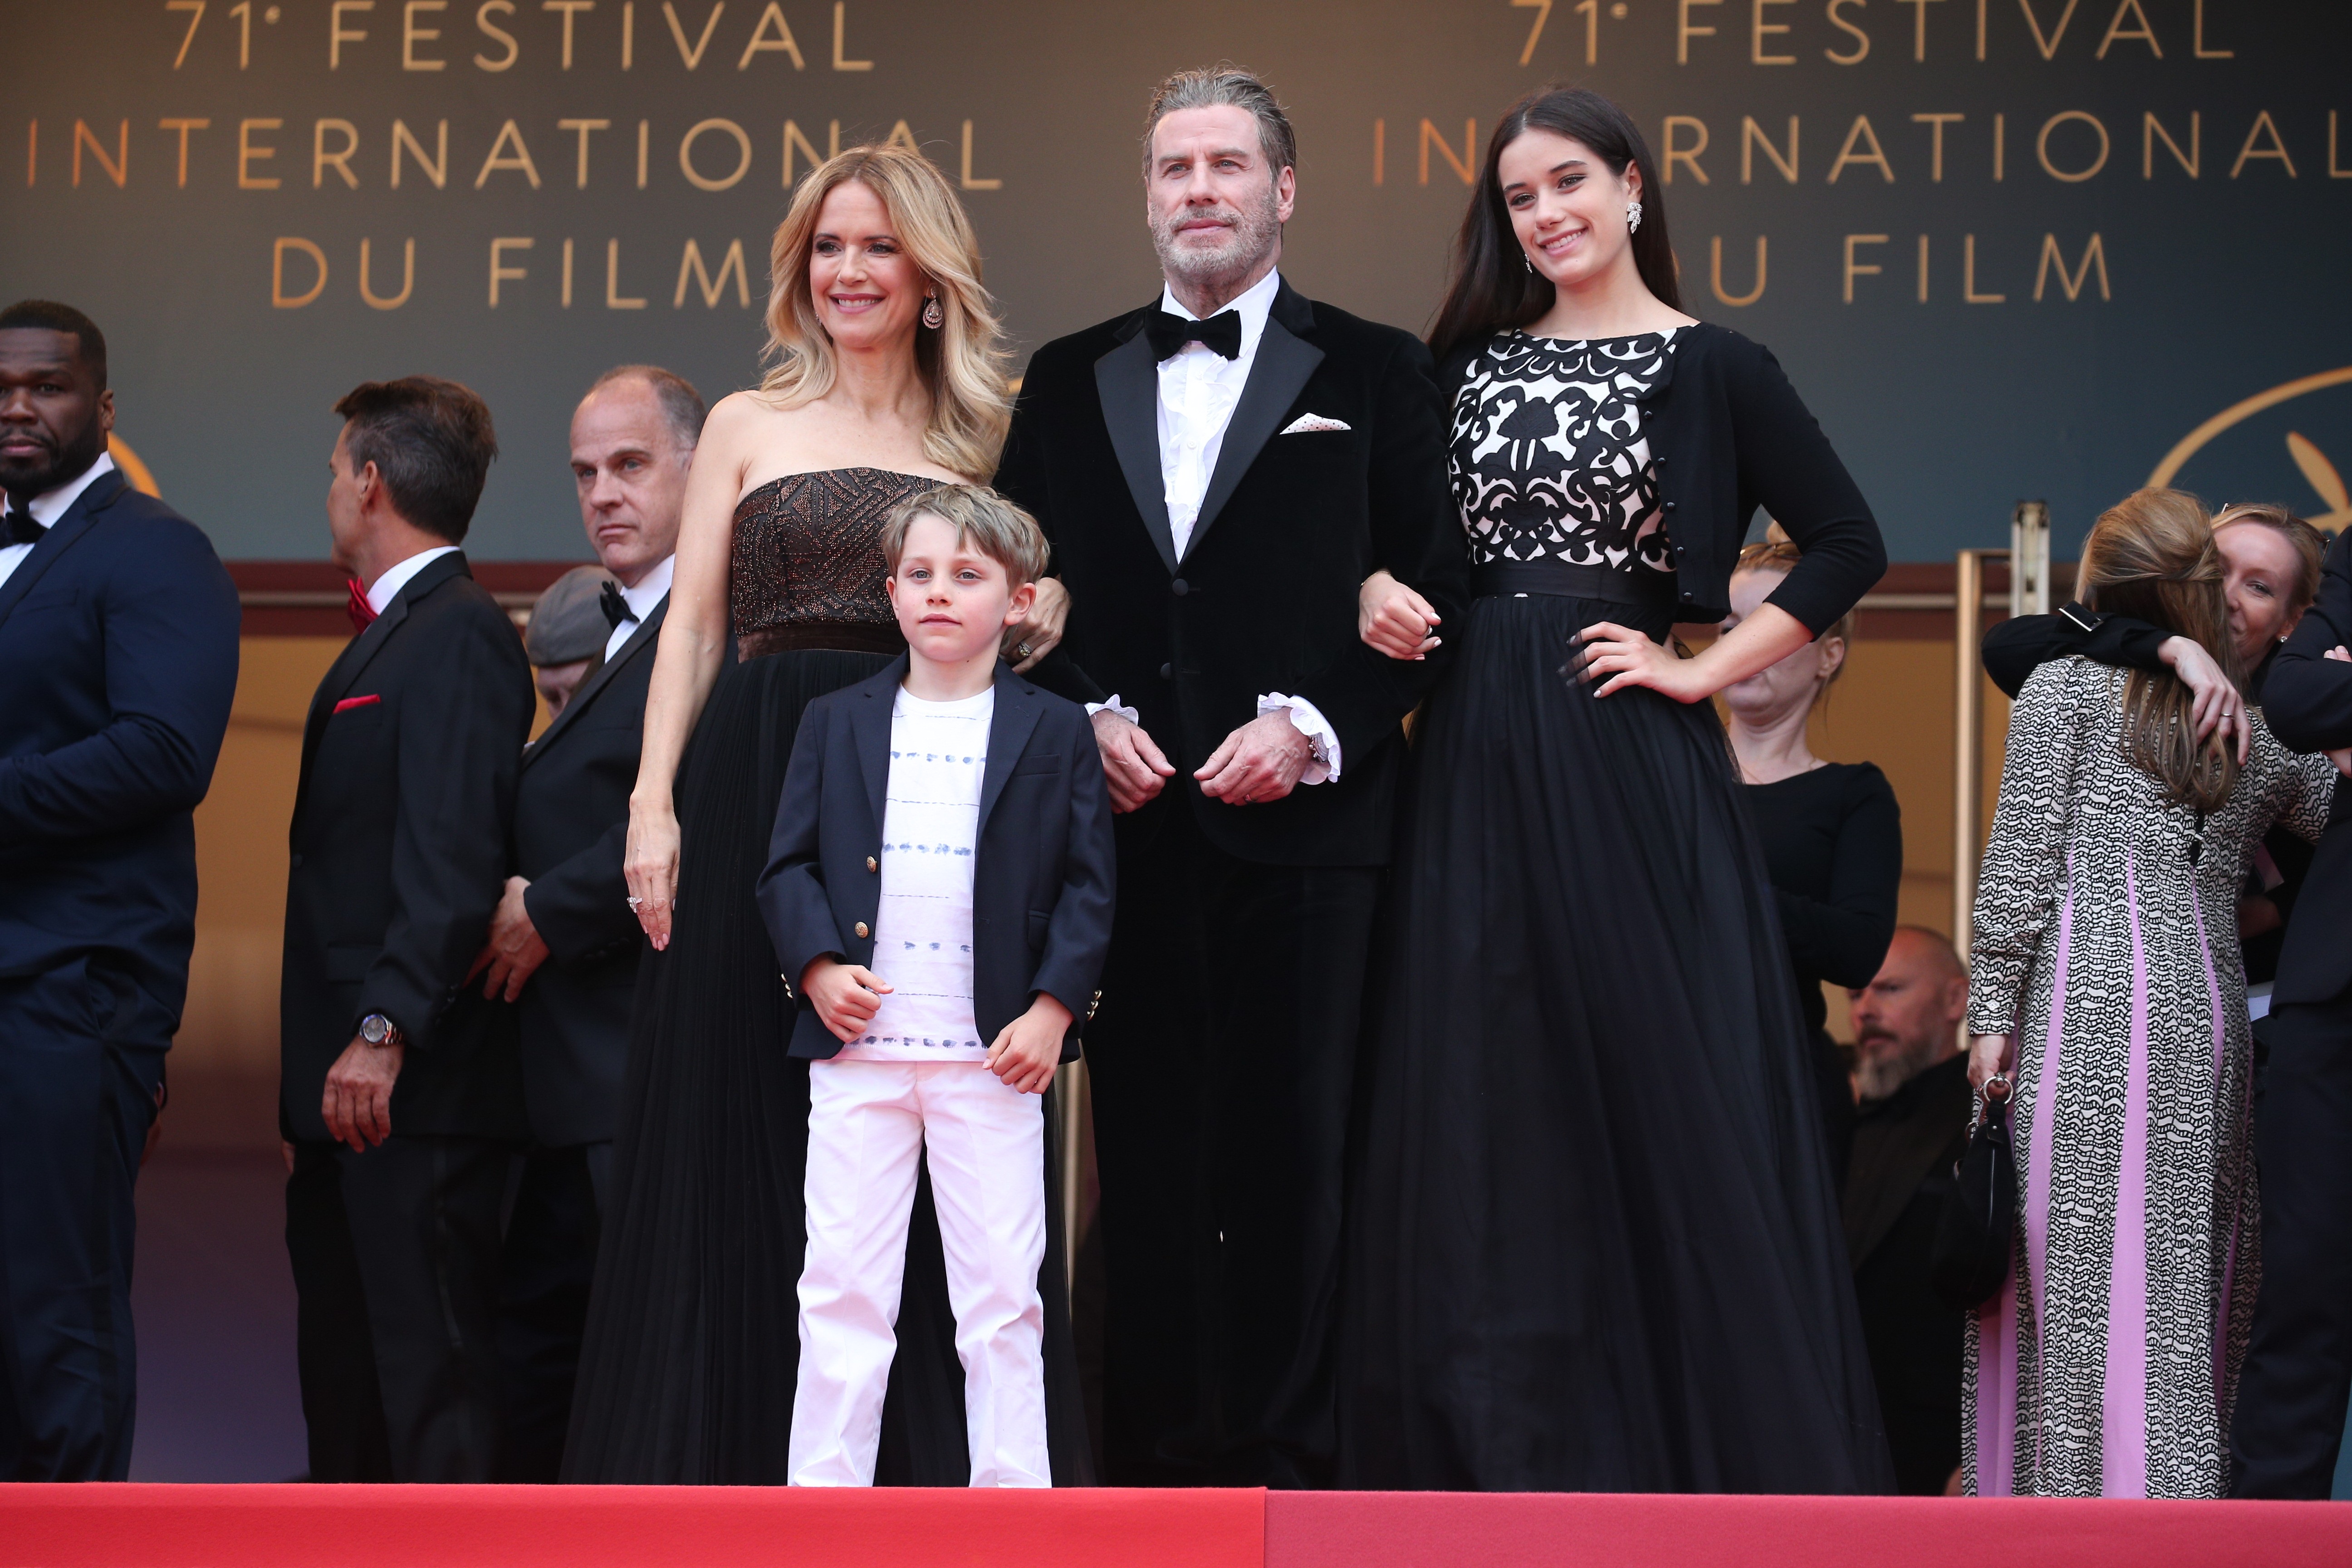 Kelly Preston and John Travolta with their children Ella and Benjamin at the screening of "Solo: A Star Wars Story" during the 71st annual Cannes Film Festival on May 15, 2018 in Cannes, France | Source: Getty Images